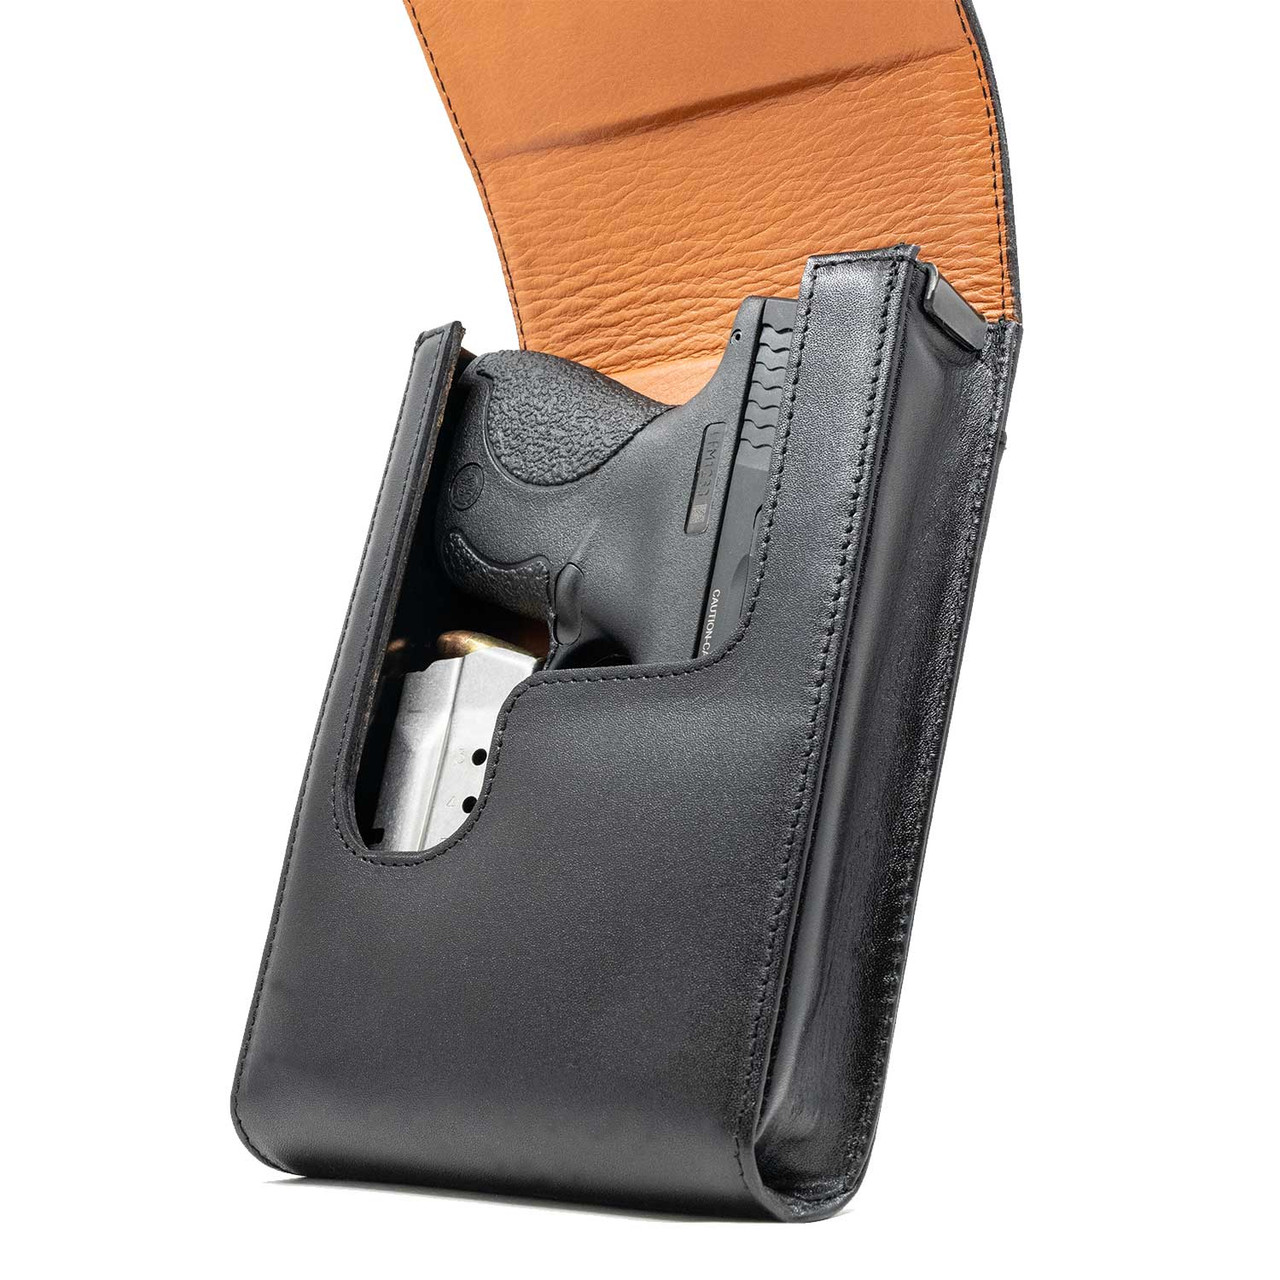 The Taurus Spectrum Xtra Mag Black Leather Holster